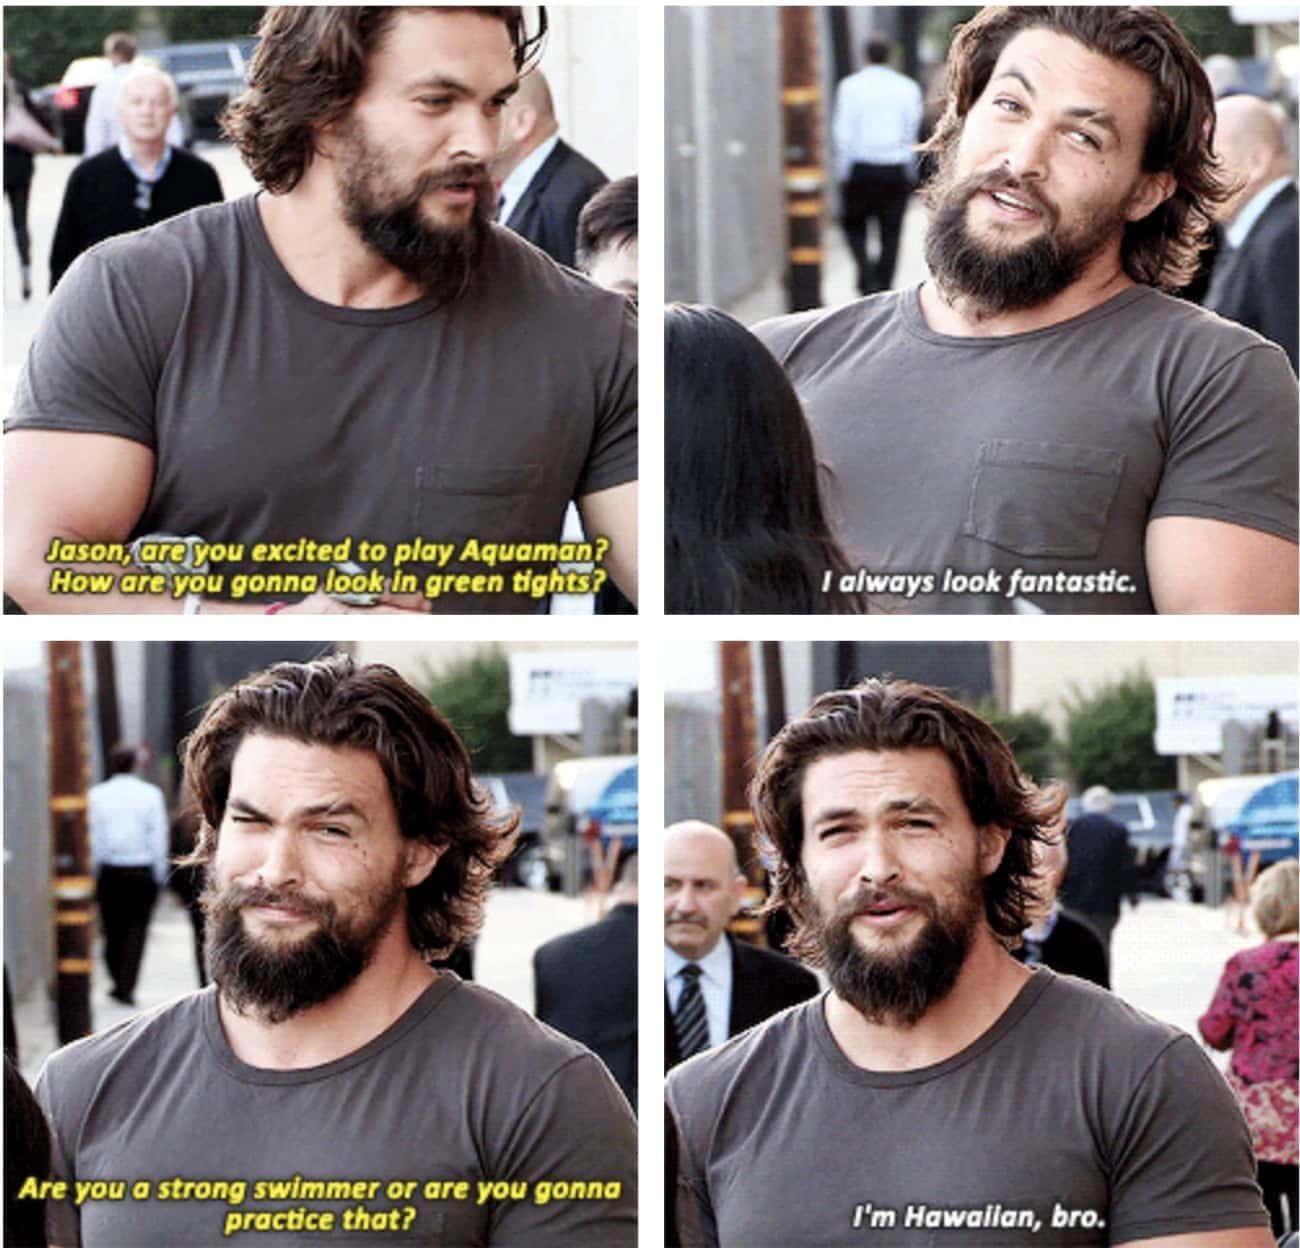 Jason Momoa Knows He'll Look Excellent In Aquaman's Green Tights